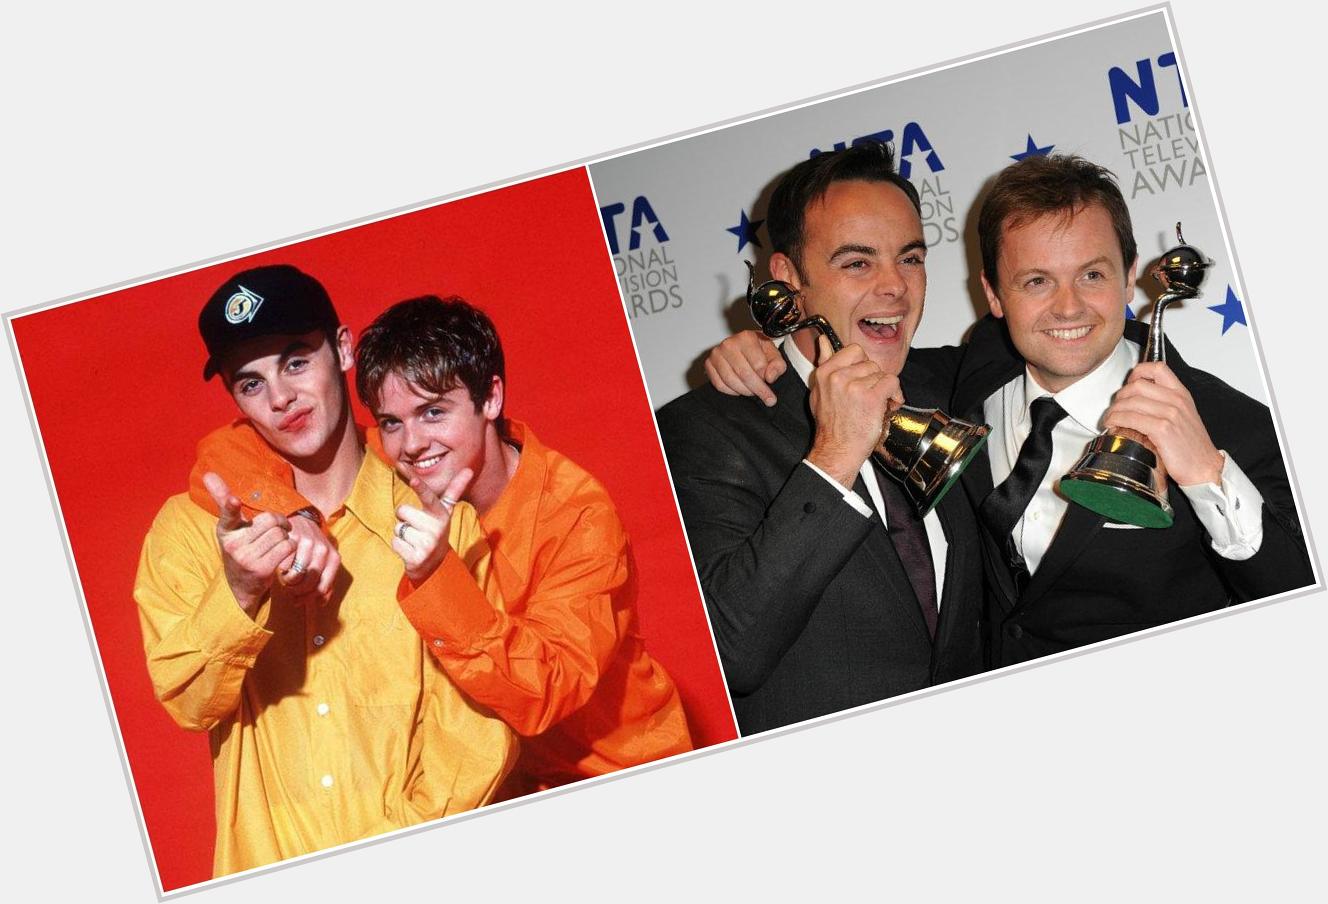 Happy Birthday Declan Donnelly! Here are our two favourite photos of A lot has changed since then! 